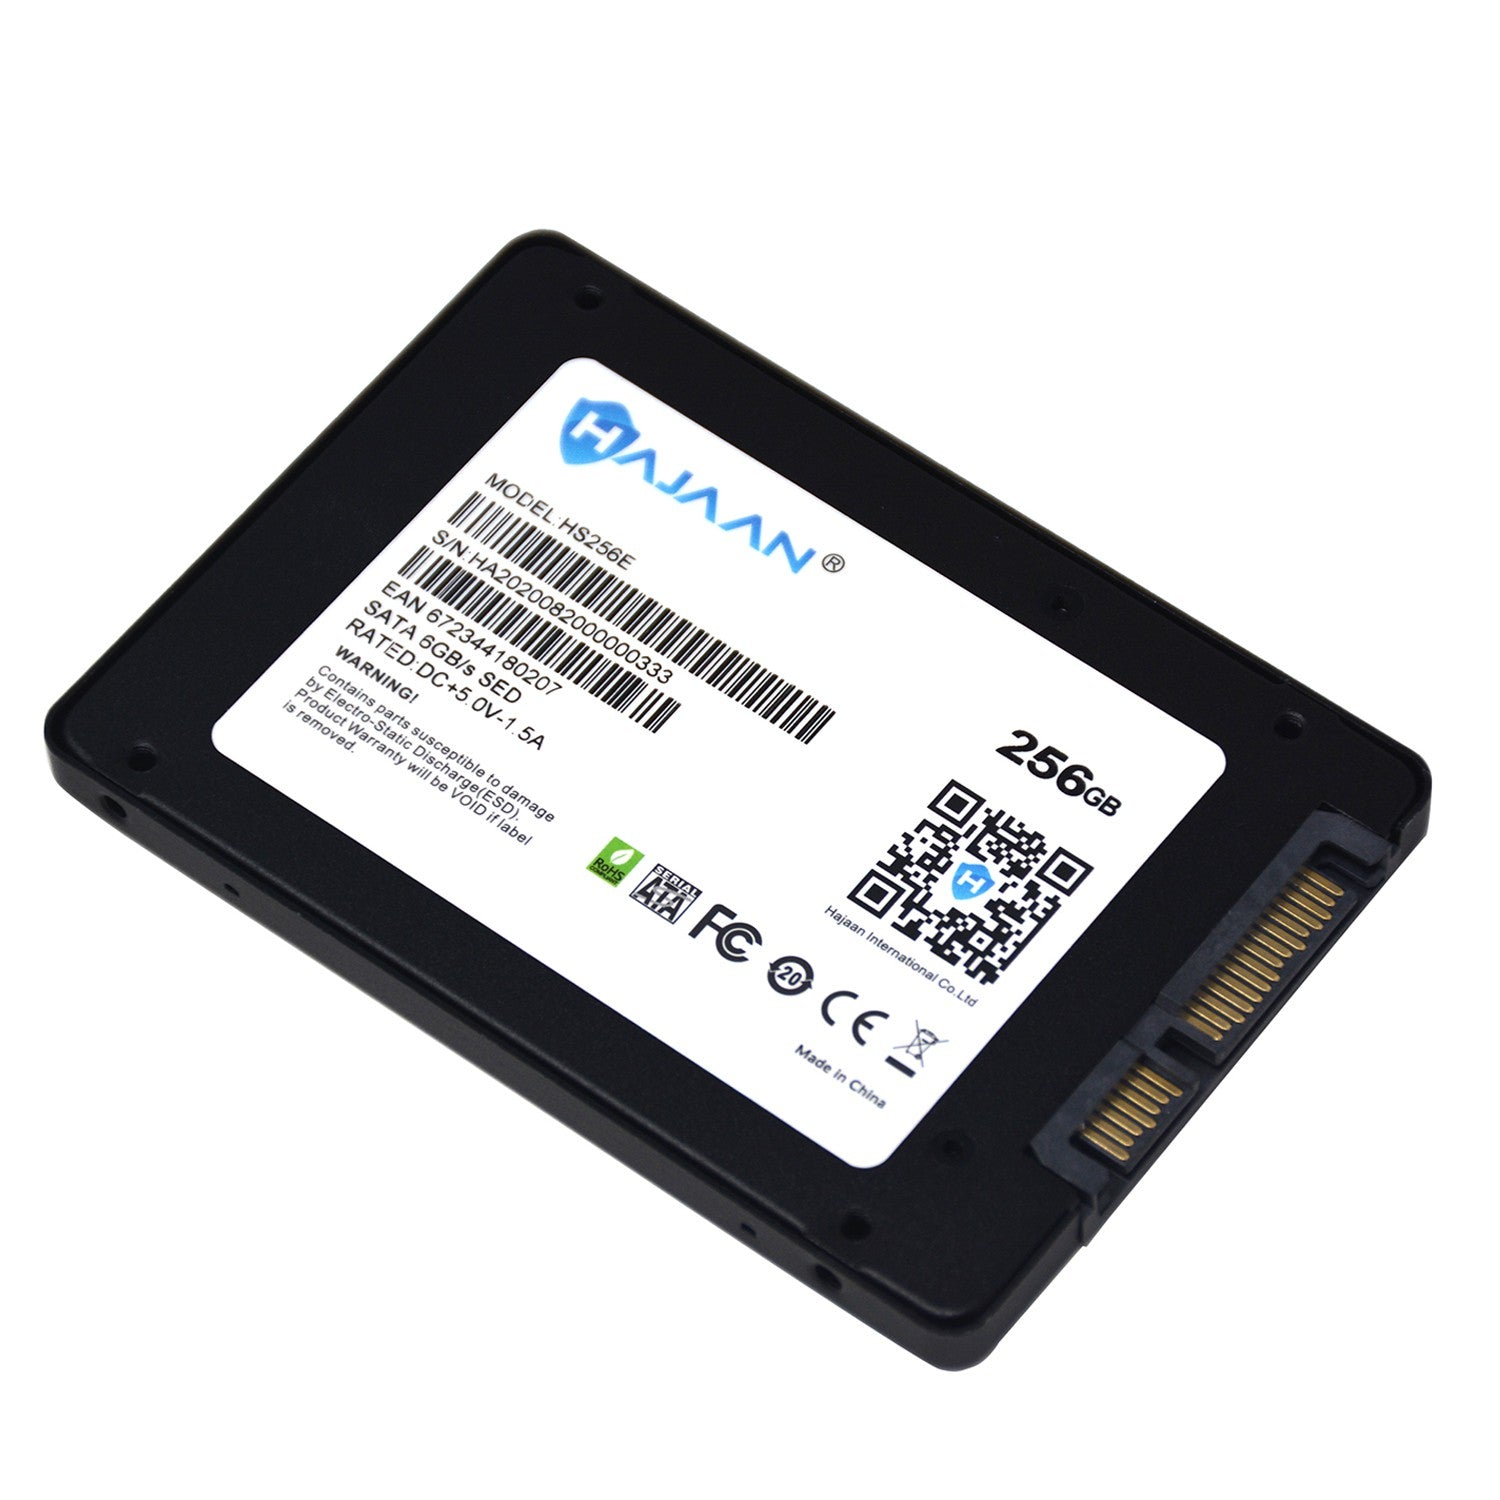 HAJAAN 256 GB Internal PC SSD- SATA III 6 Gb/s, 3D NAND TLC, 2.5”, Up to 550MB/s , Internal Solid State Drive for Laptop Tablet PC Desktop - 1 Year Warranty